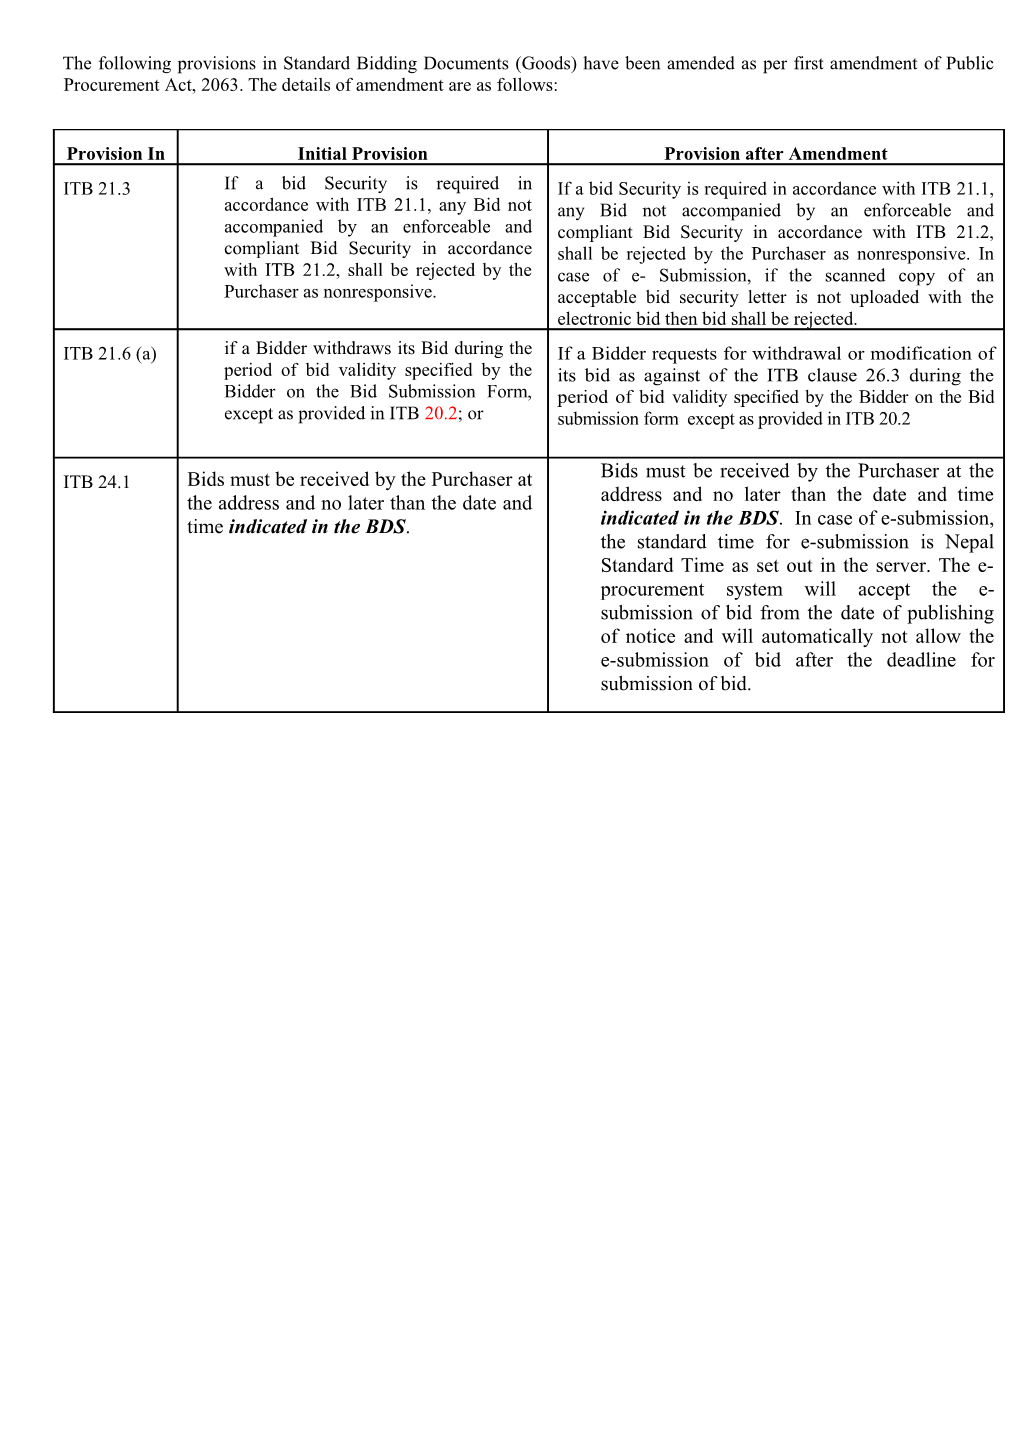 The Following Provisions in Standard Bidding Documents (Goods) Havebeen Amended As Per